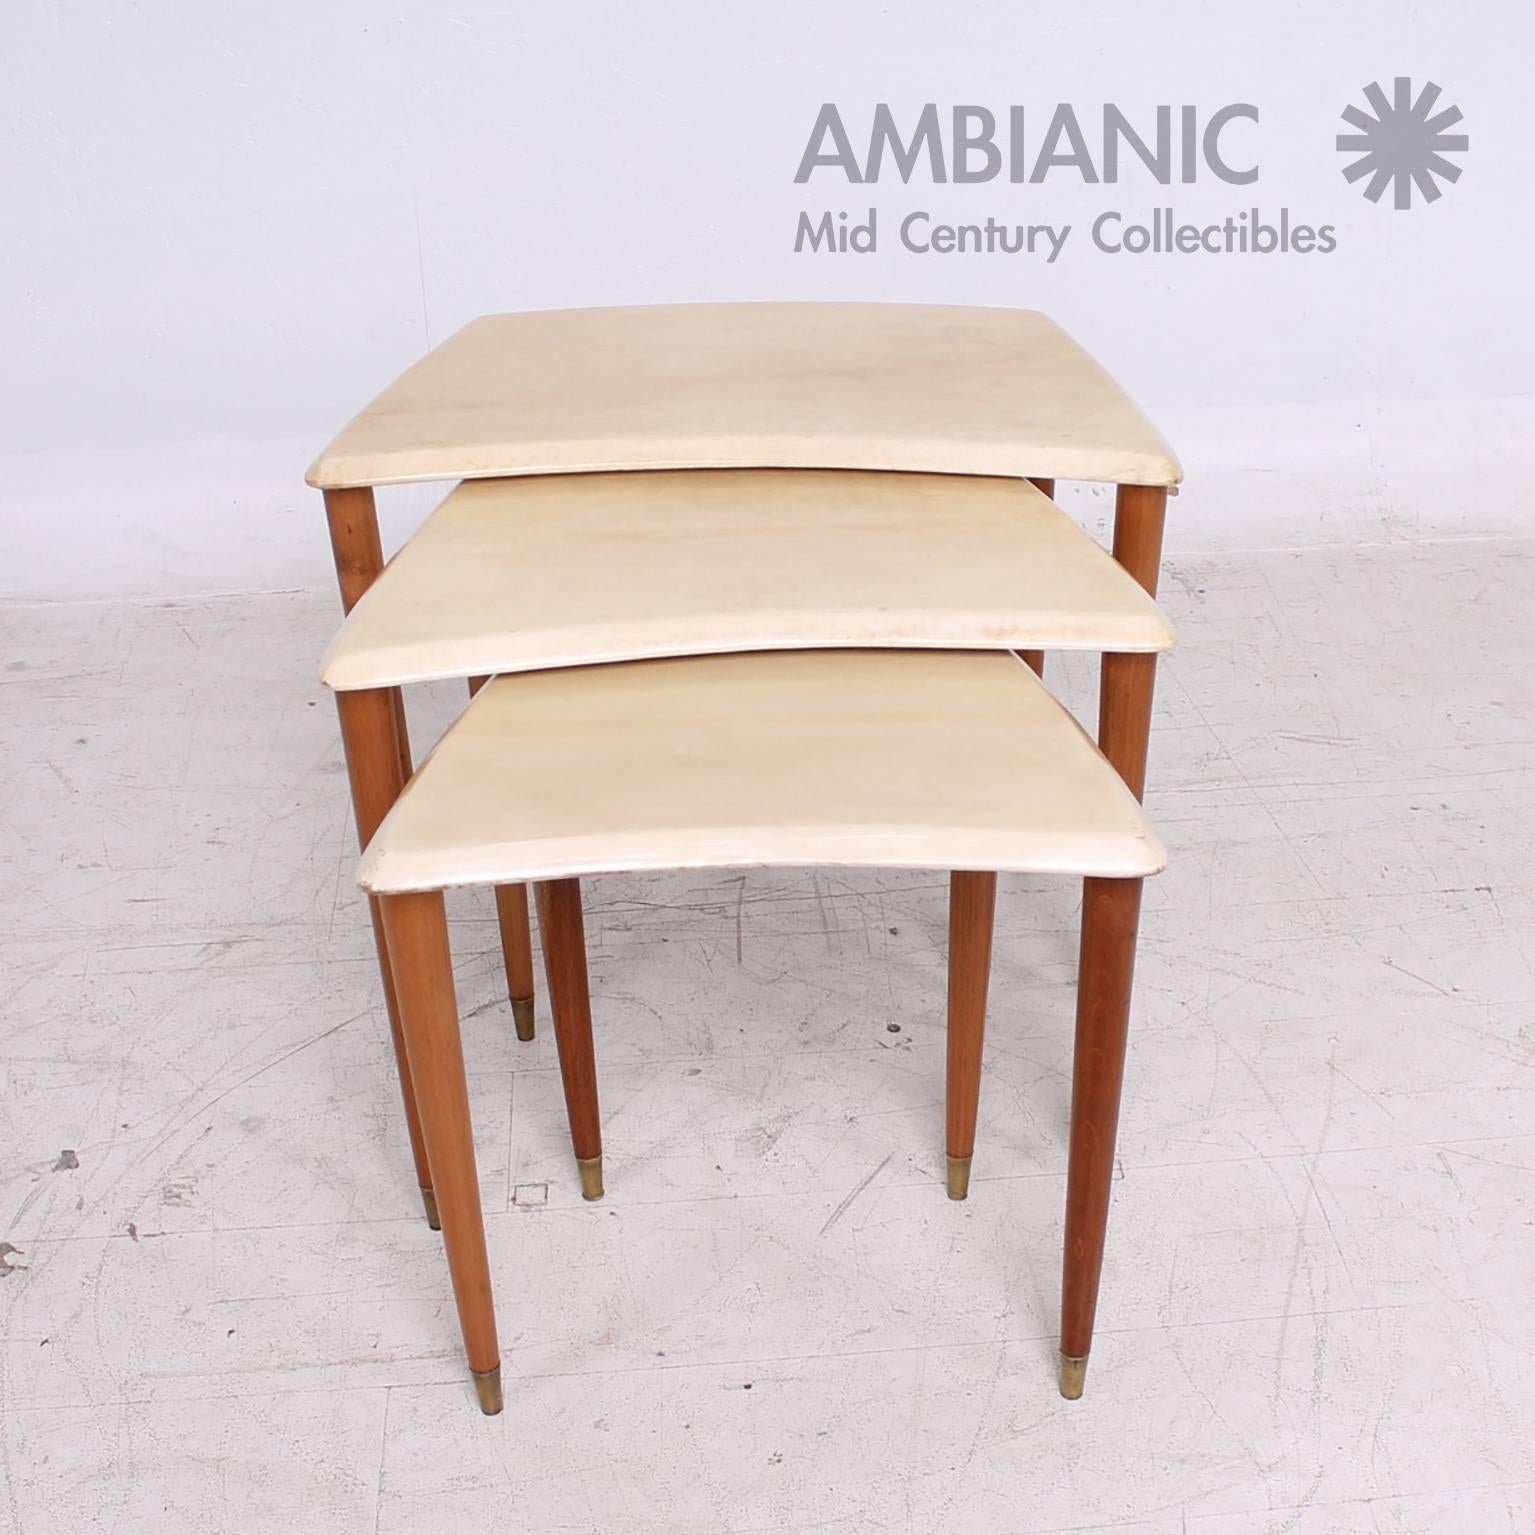 Mid-Century Modern Nesting Tables in Goatskin and Mahogany Wood 1